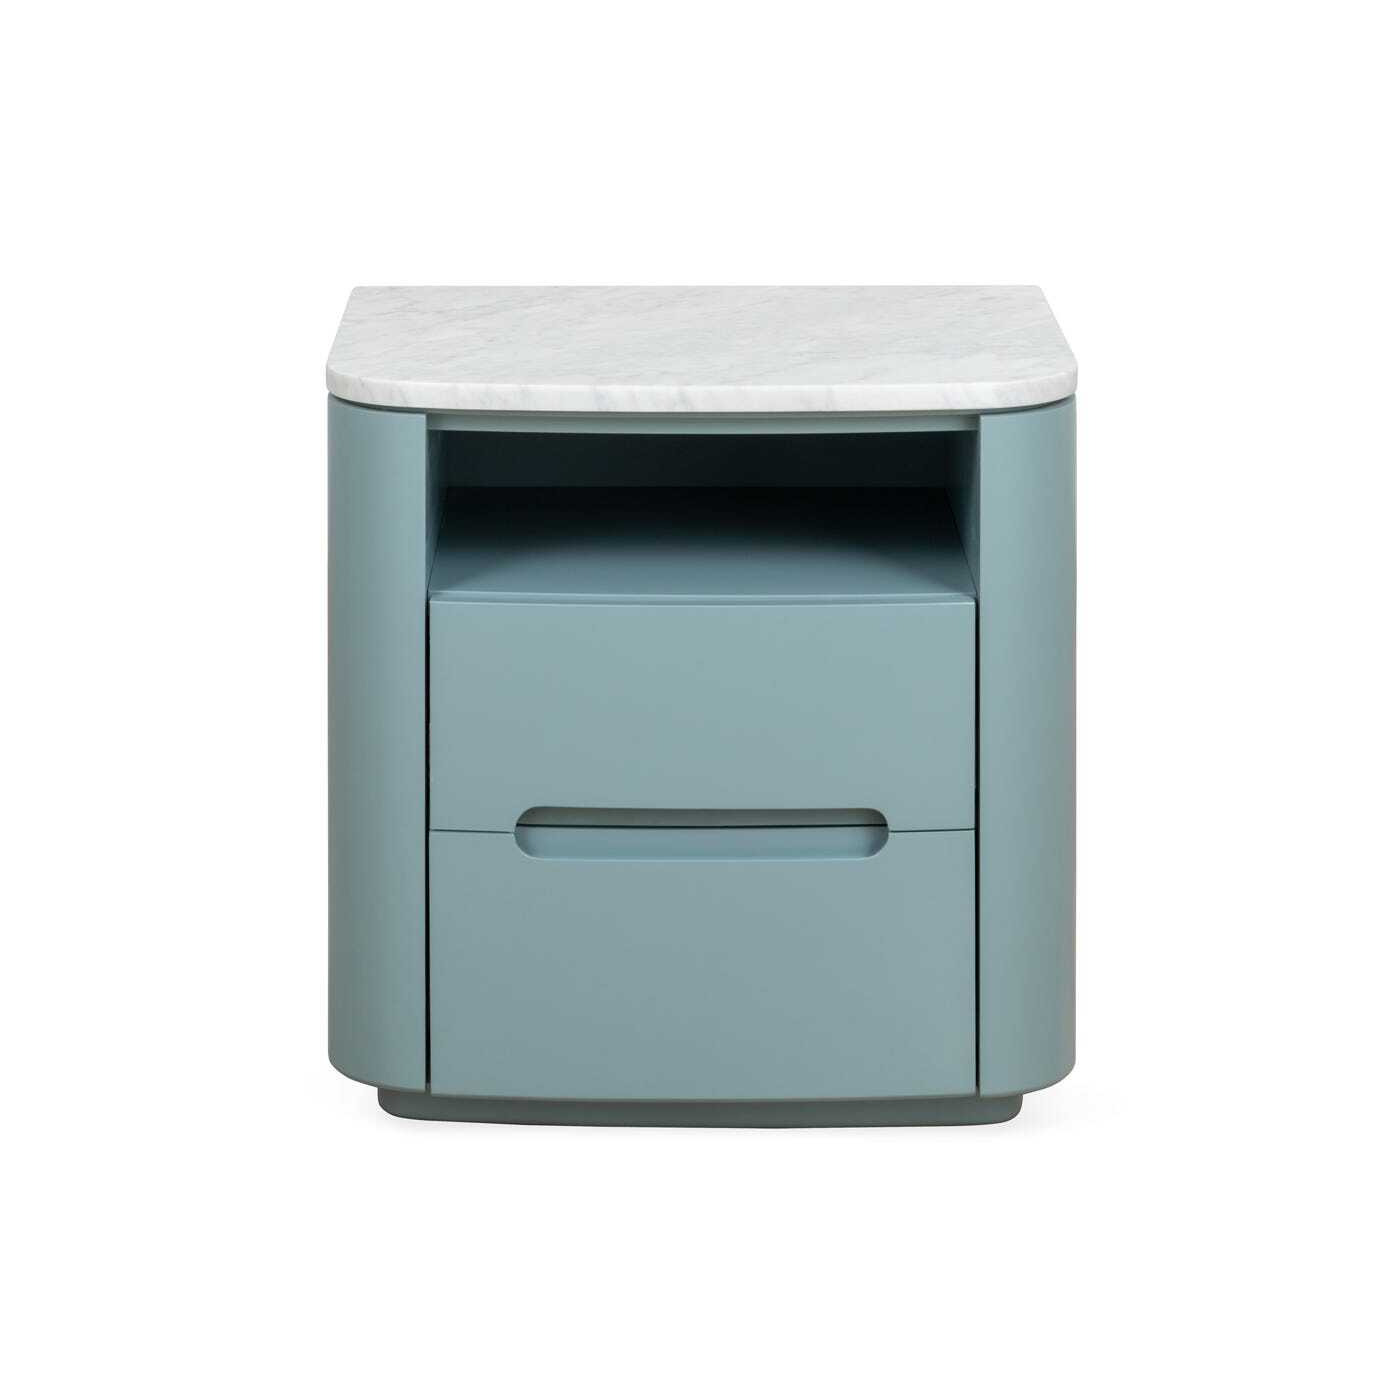 Heal's Florian Bedside Table in Blue - image 1